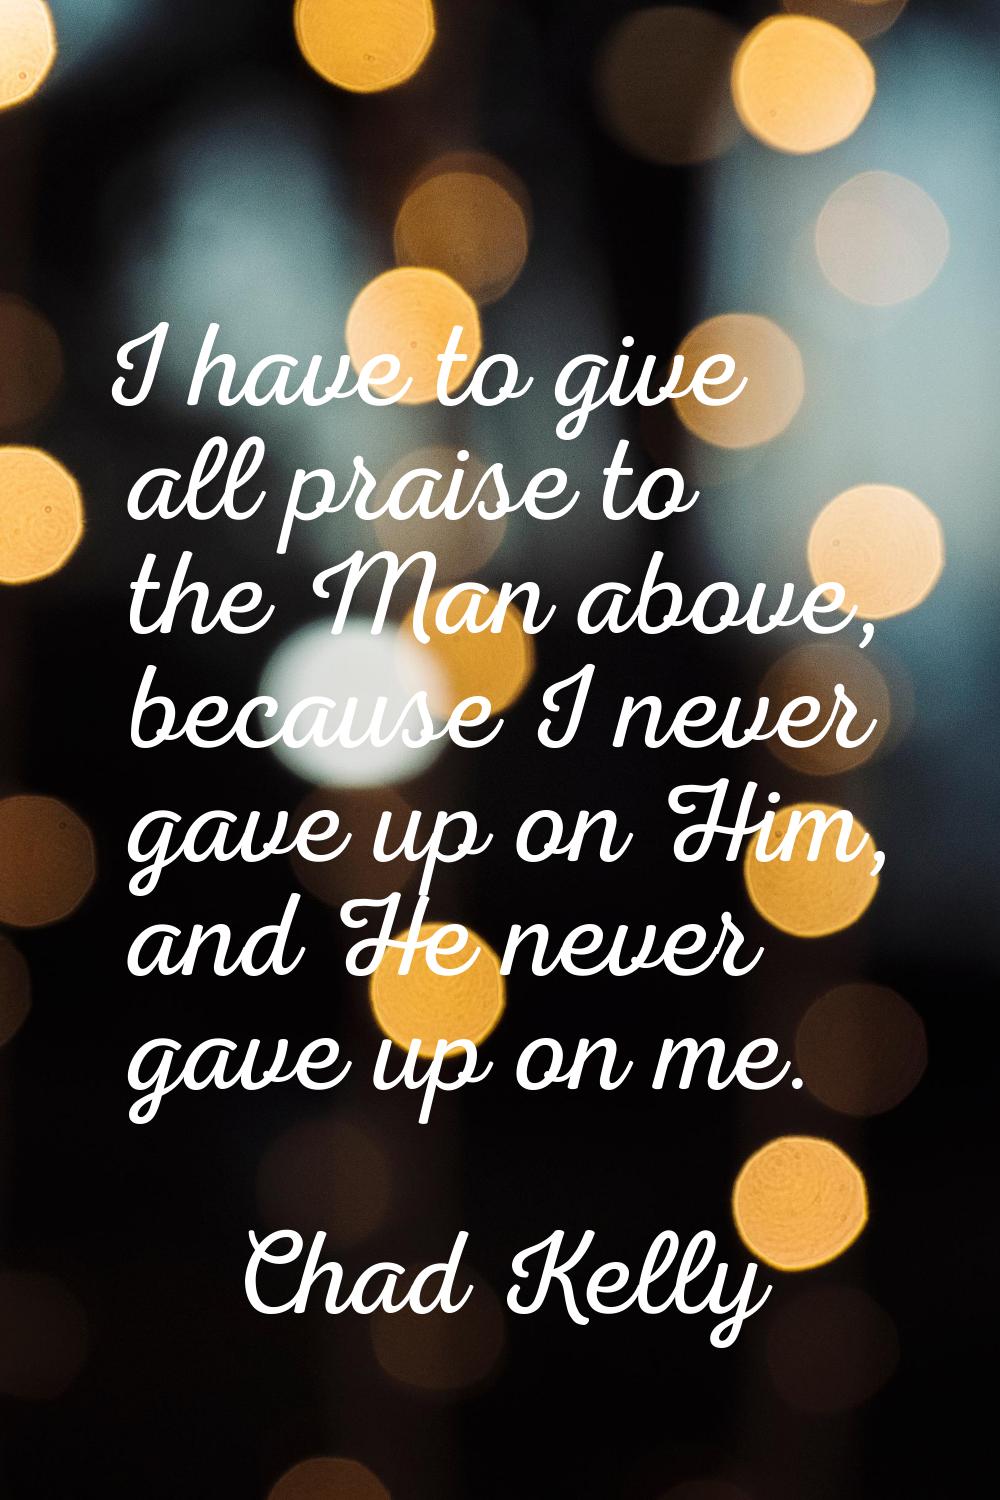 I have to give all praise to the Man above, because I never gave up on Him, and He never gave up on